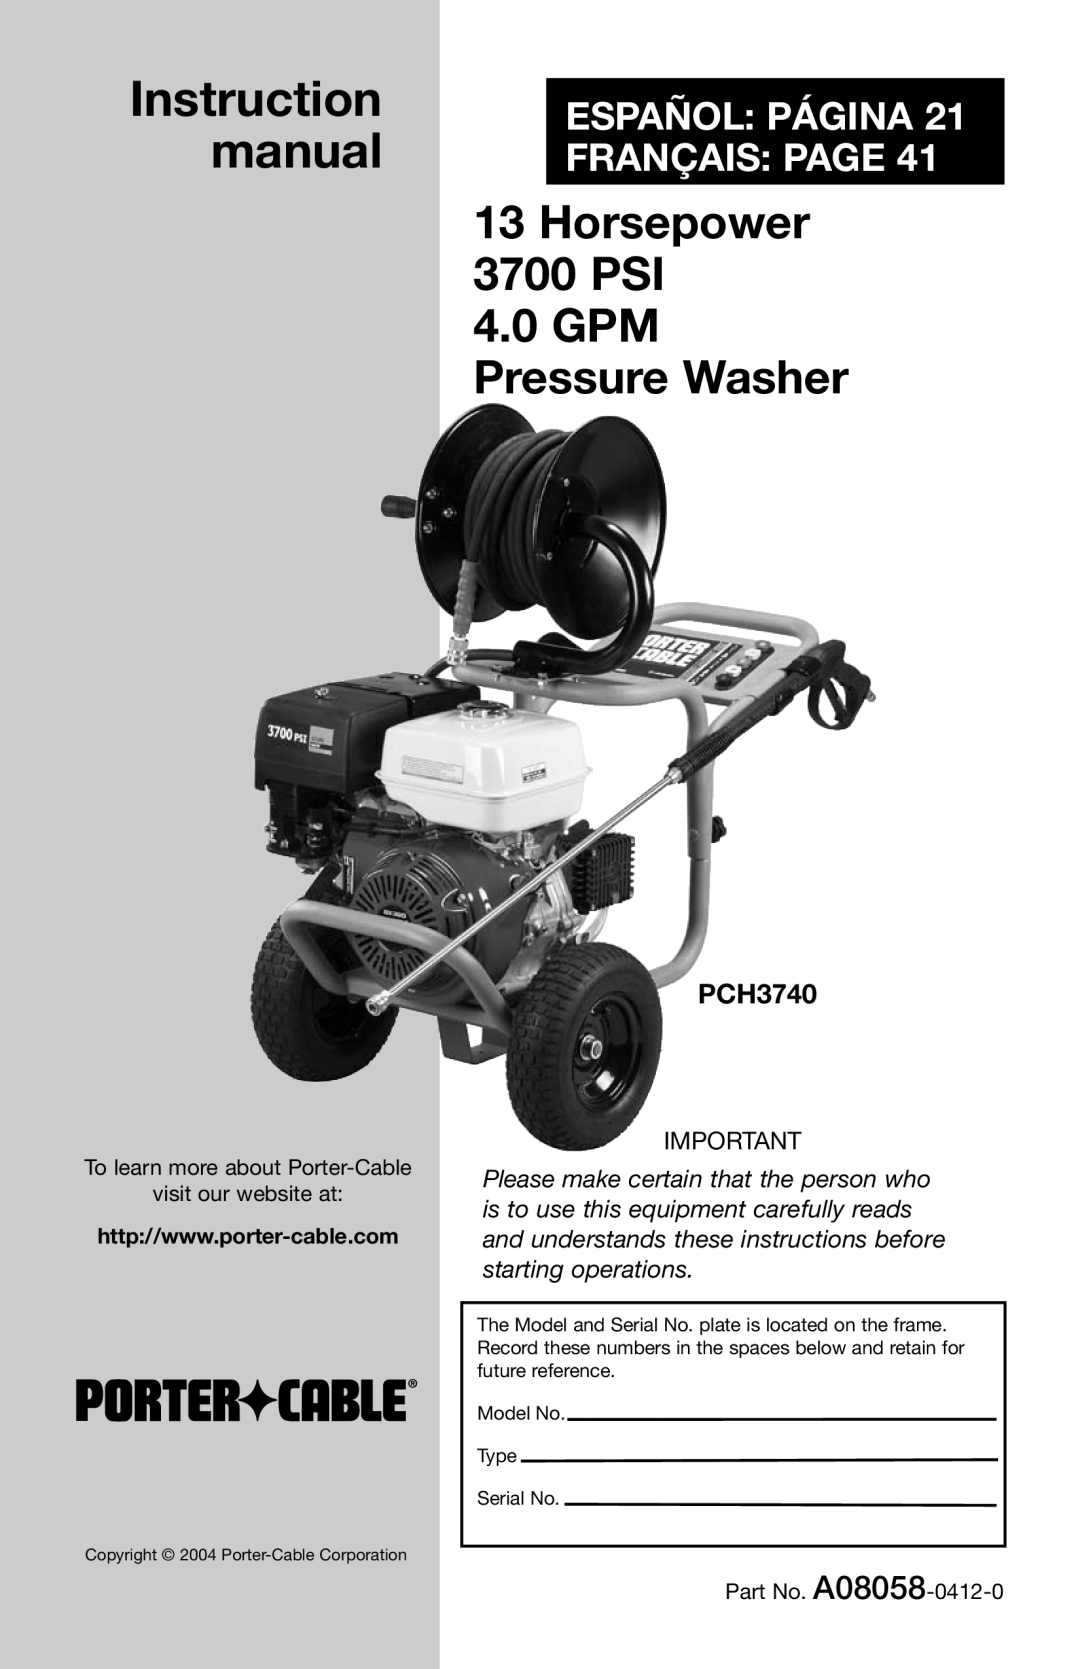 Porter-Cable A08058-0412-0 instruction manual PCH3740, Horsepower 3700 PSI, GPM Pressure Washer 